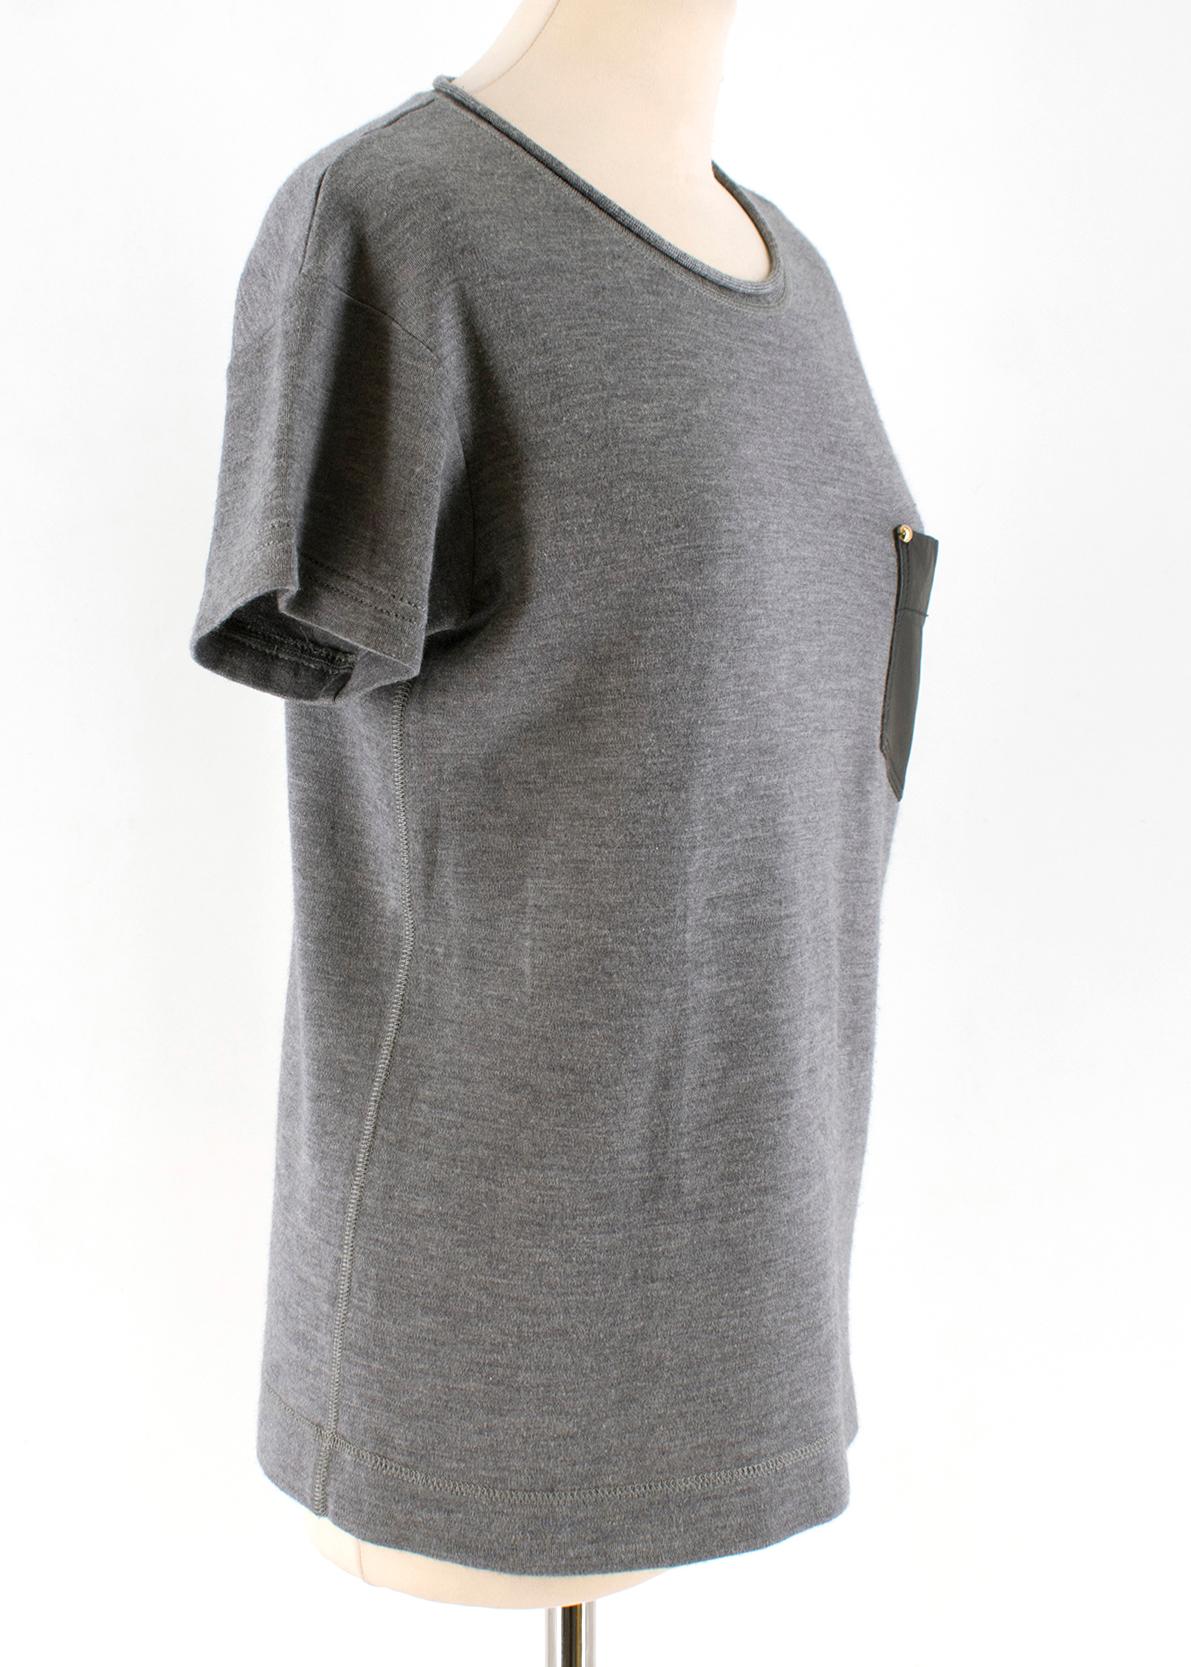 Louis Vuitton leather-pocket cashmere & silk-blend T-shirt

- Grey, soft-touch cashmere and silk-blend jersey 
- Round neck, short sleeves 
- Single black leather patch pocket 
- Golden hardware at the angle of the pocket

Please note, these items